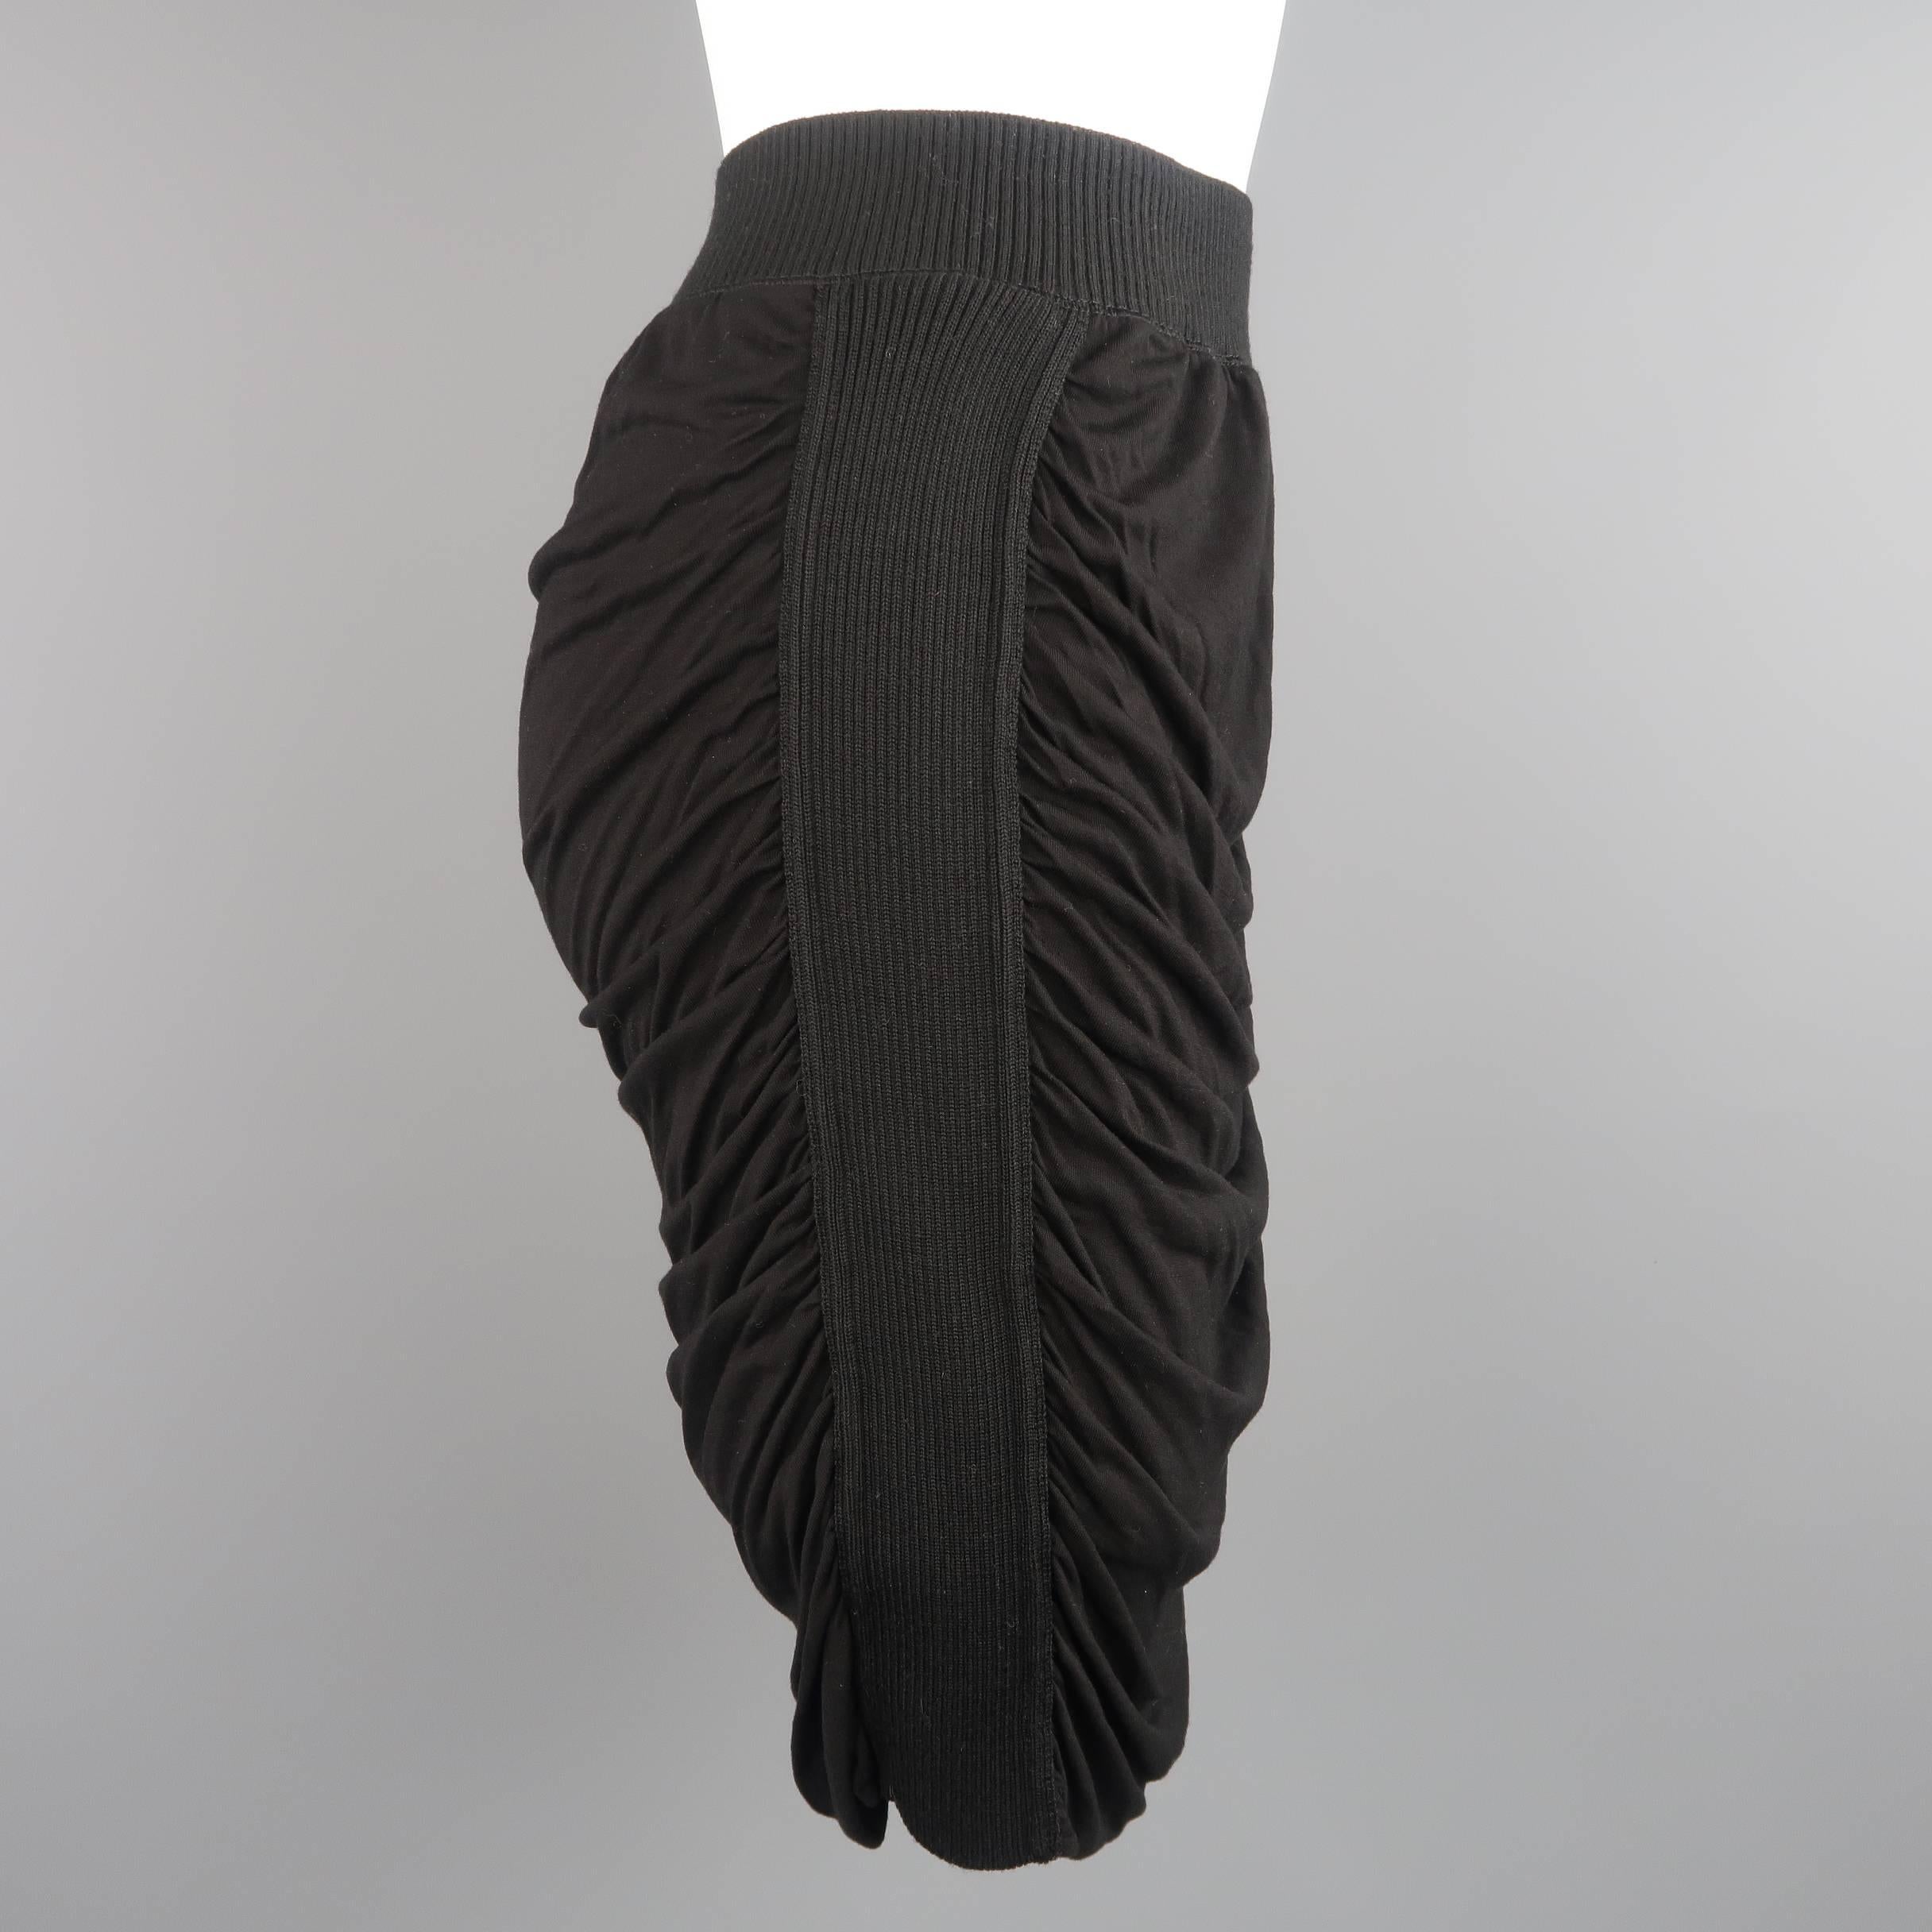 Women's Jean Paul Gaultier Ruched Black Viscose Blend Ribbed Side Pencil Skirt